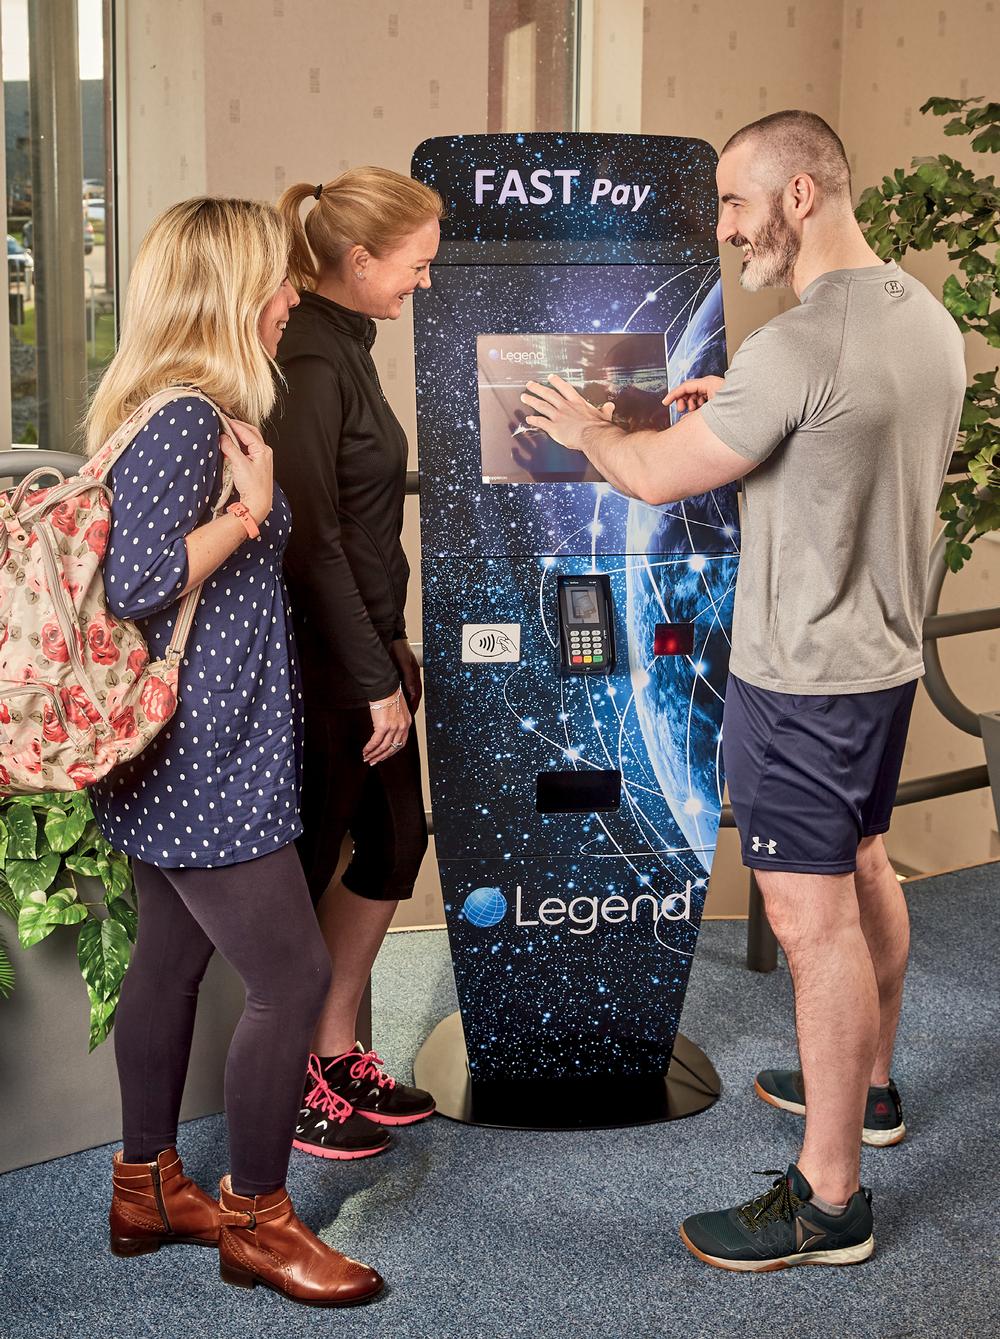 Legend's Fast-Payment Kiosk makes it easier for customers to pay for services